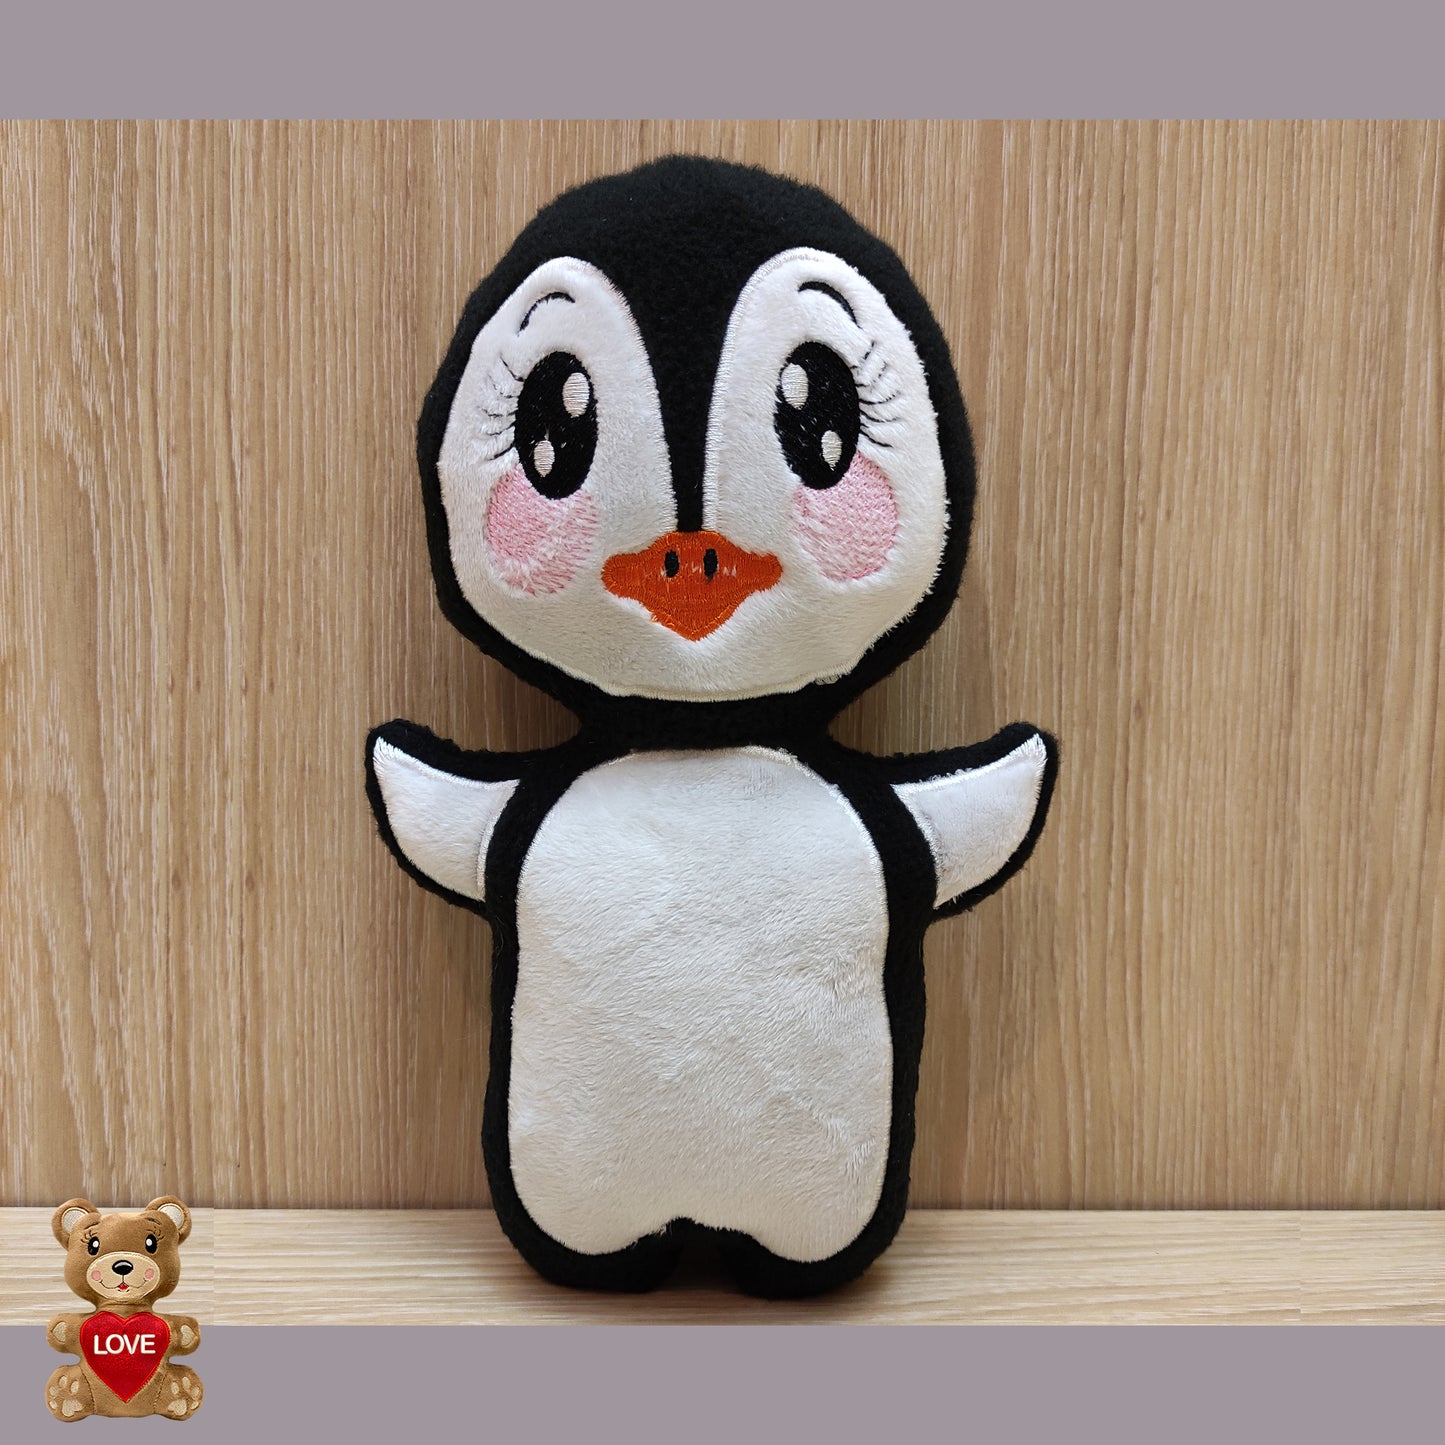 Personalised embroidery Plush Soft Toy Christmas Penguin ,Super cute personalised soft plush toy, Personalised Gift, Unique Personalized Birthday Gifts , Custom Gifts For Children